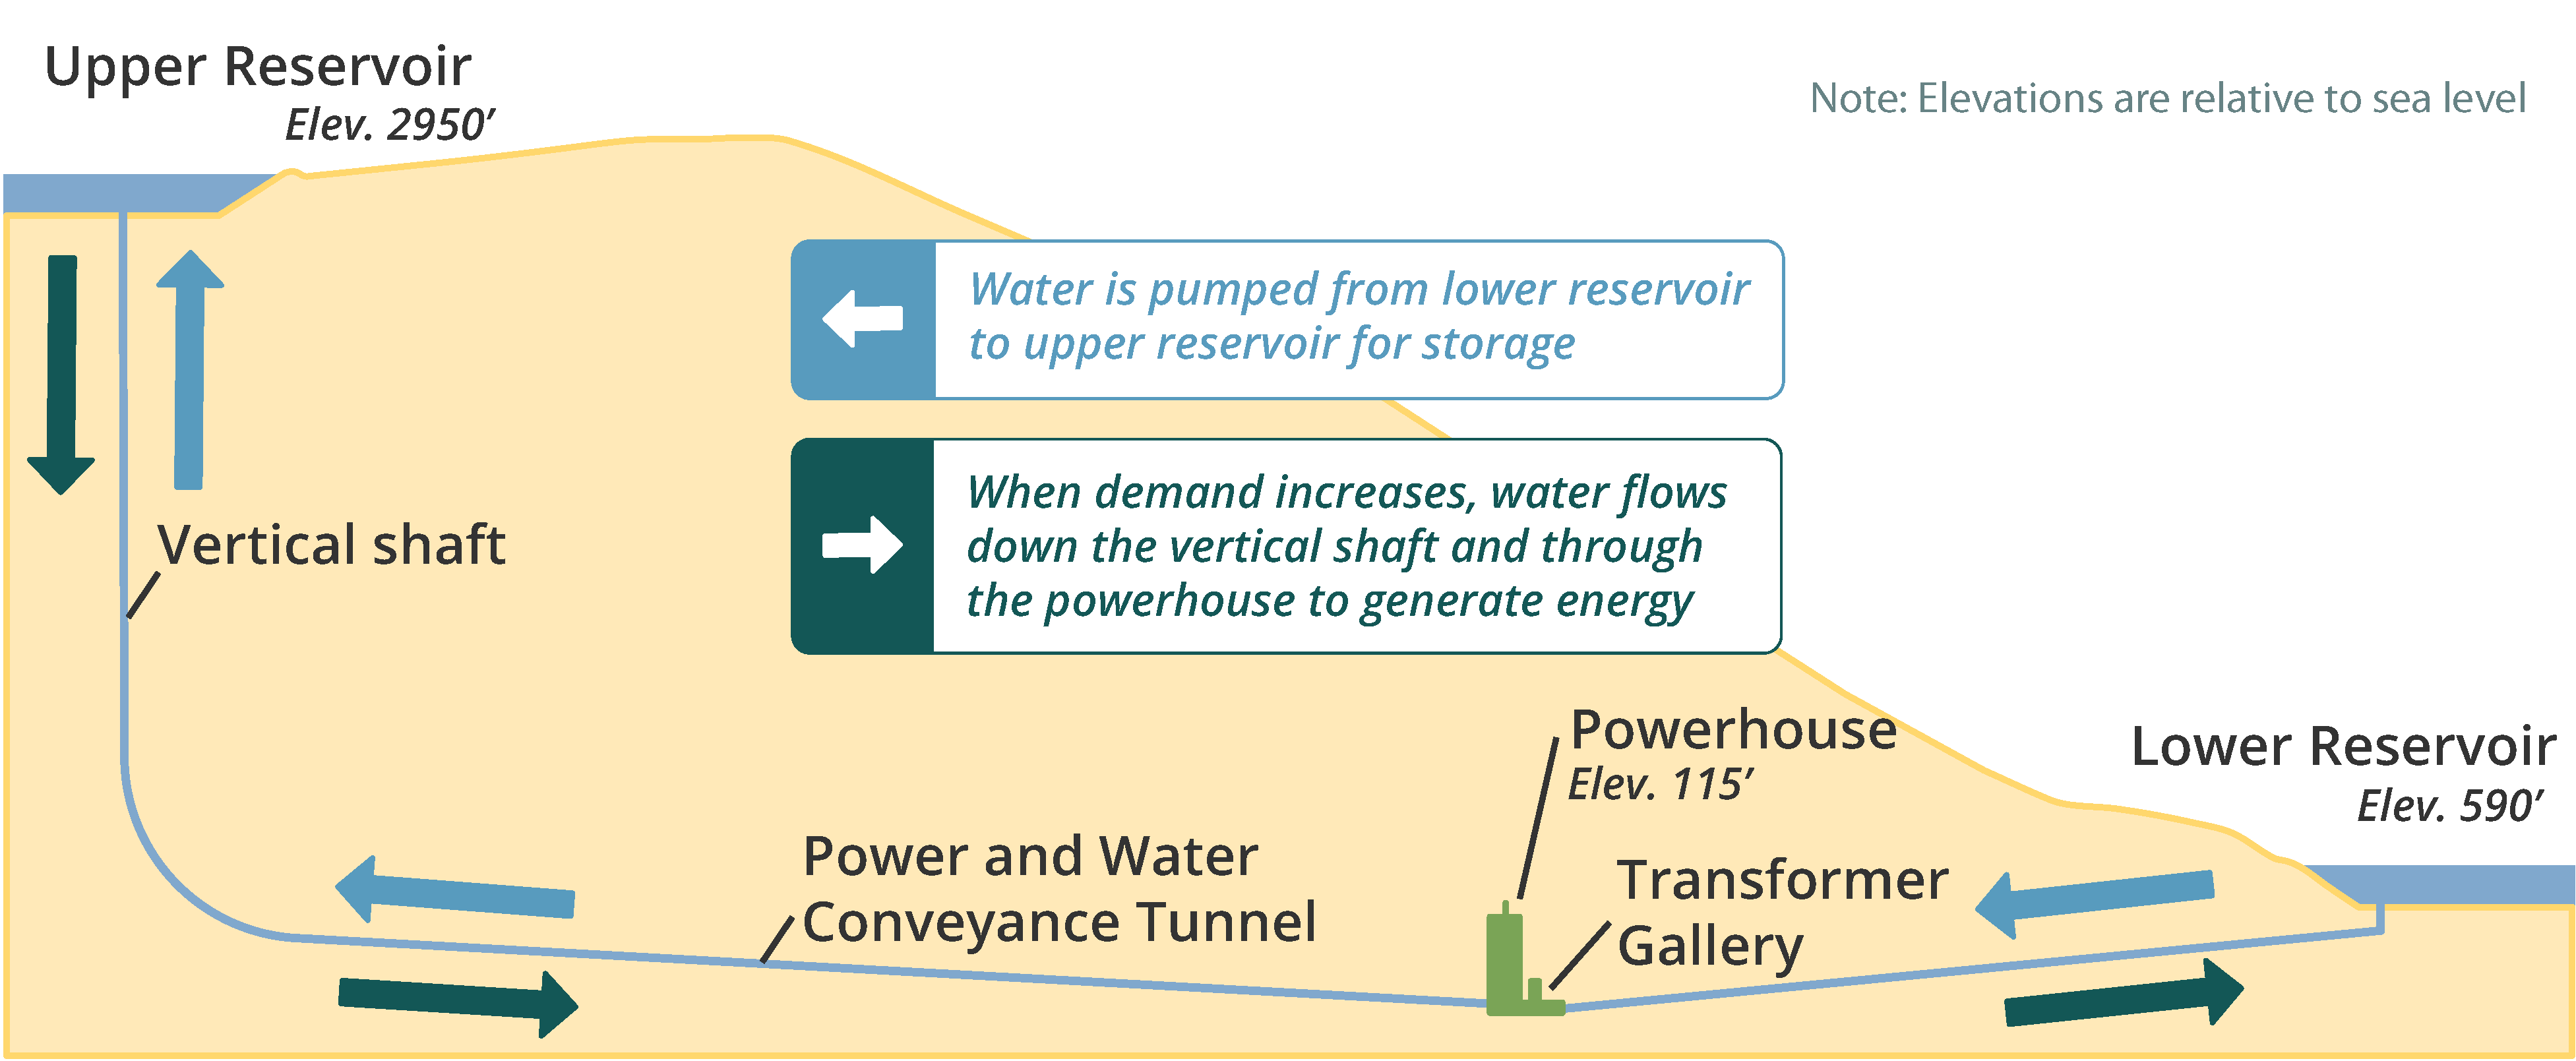 Project schematic showing upper and lower reservoirs and how water flows to create energy